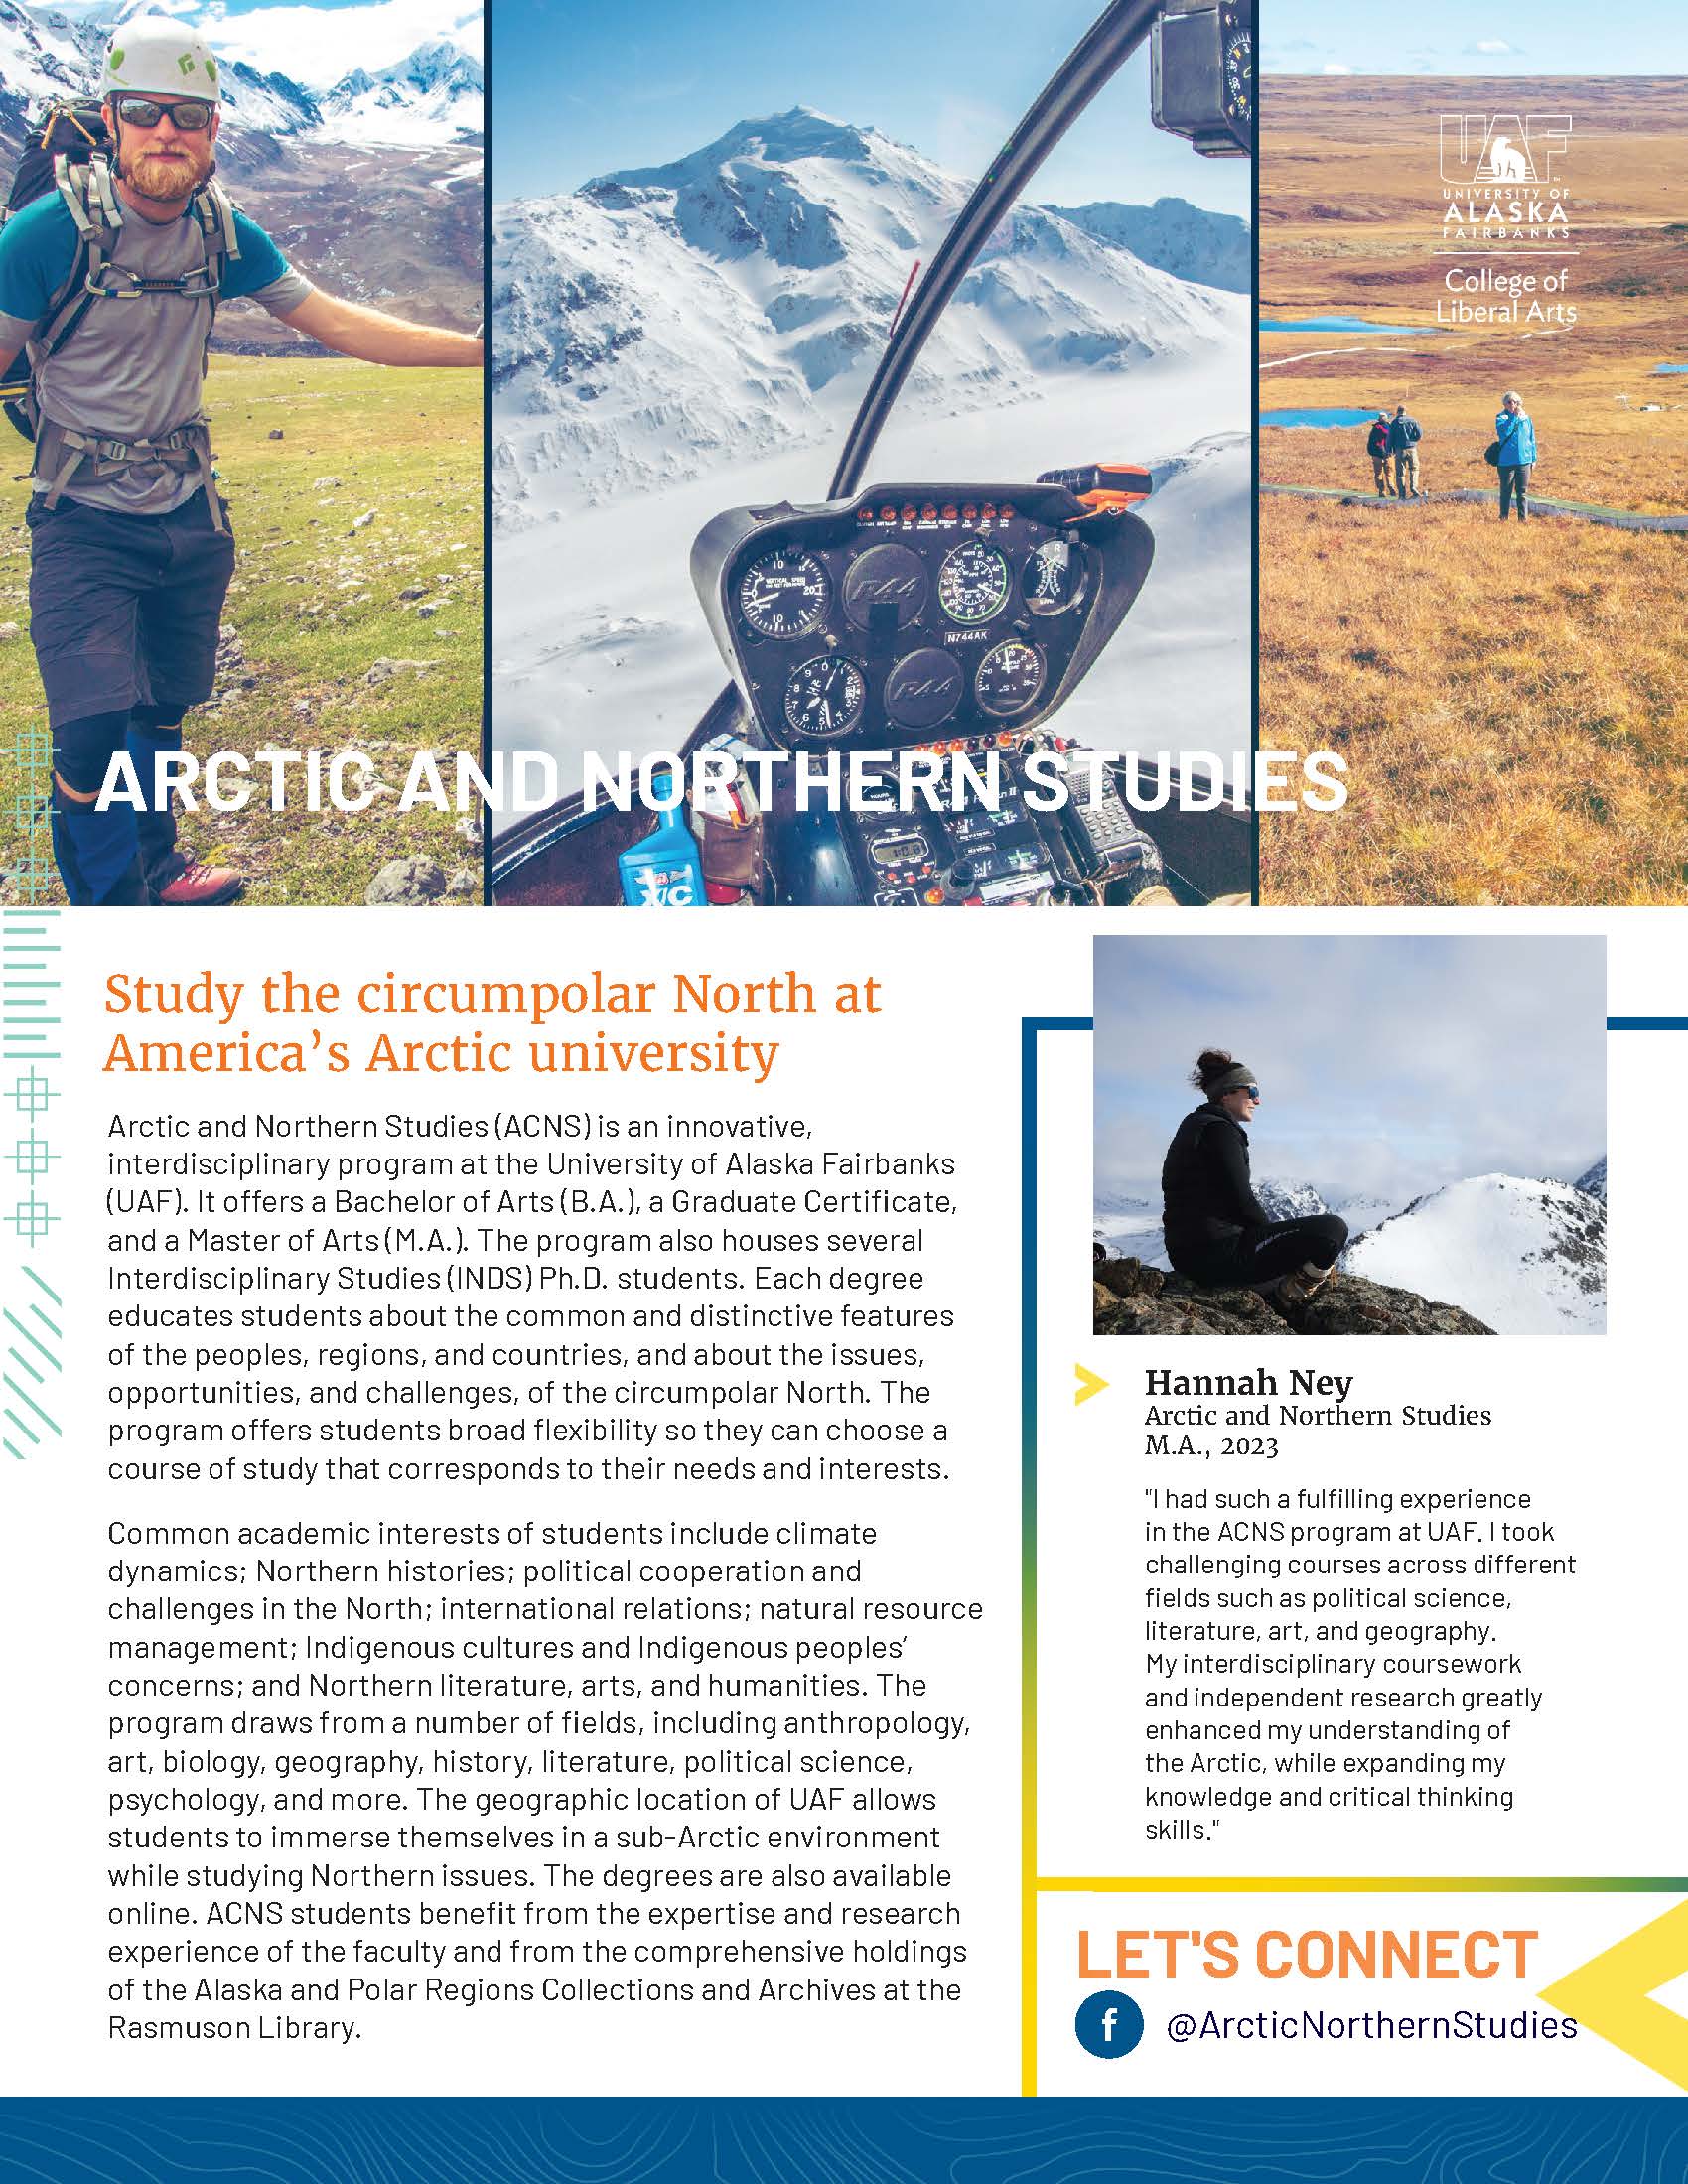 Department tear sheet for the Arctic and Northern Studies Program. UAF image.